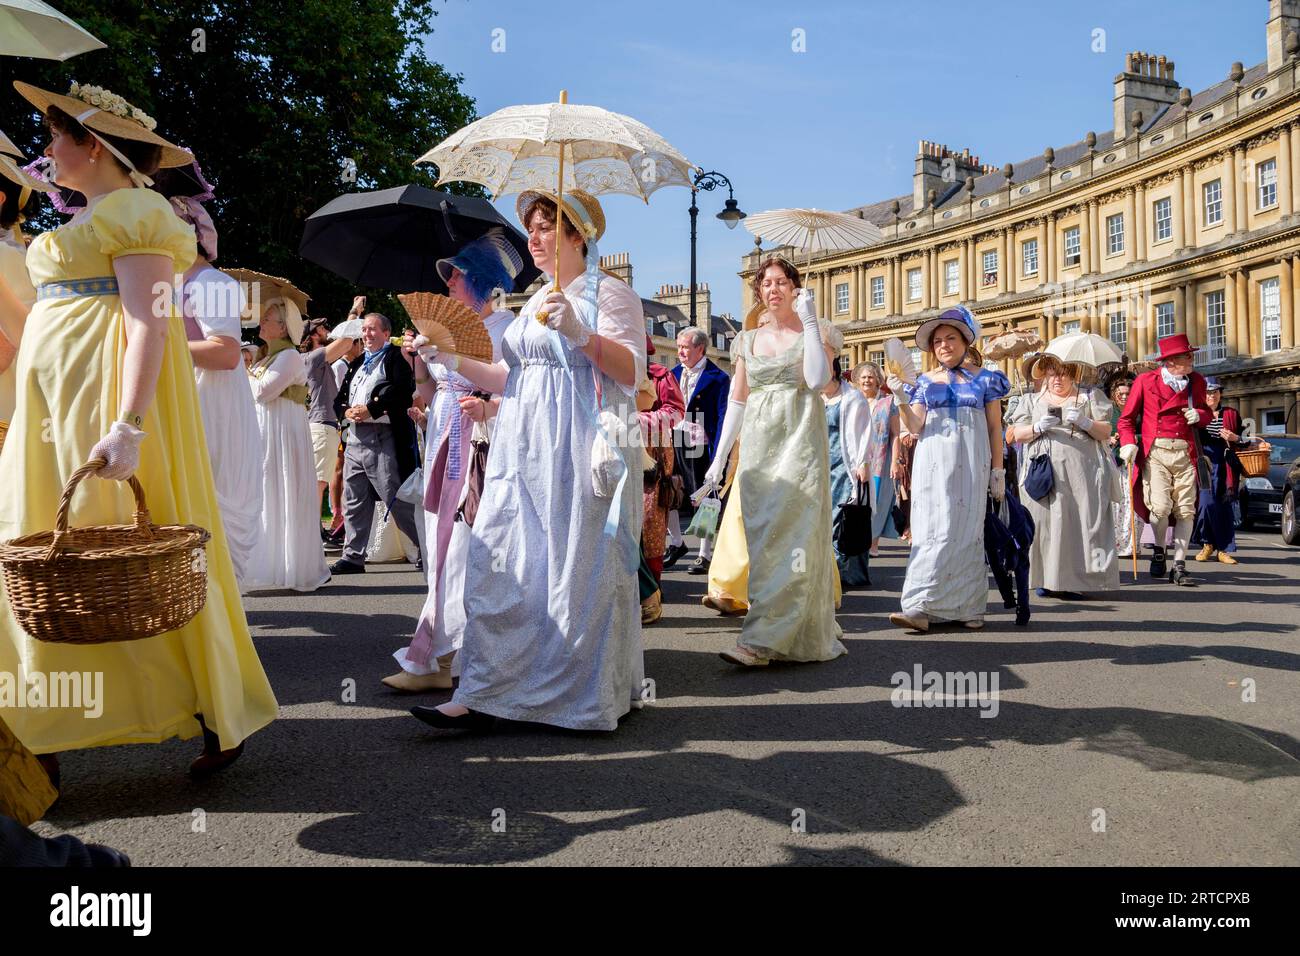 Jane Austen festival fans taking part in the world-famous Grand Regency Costumed Promenade are pictured as they walk around the Circus in Bath, UK Stock Photo